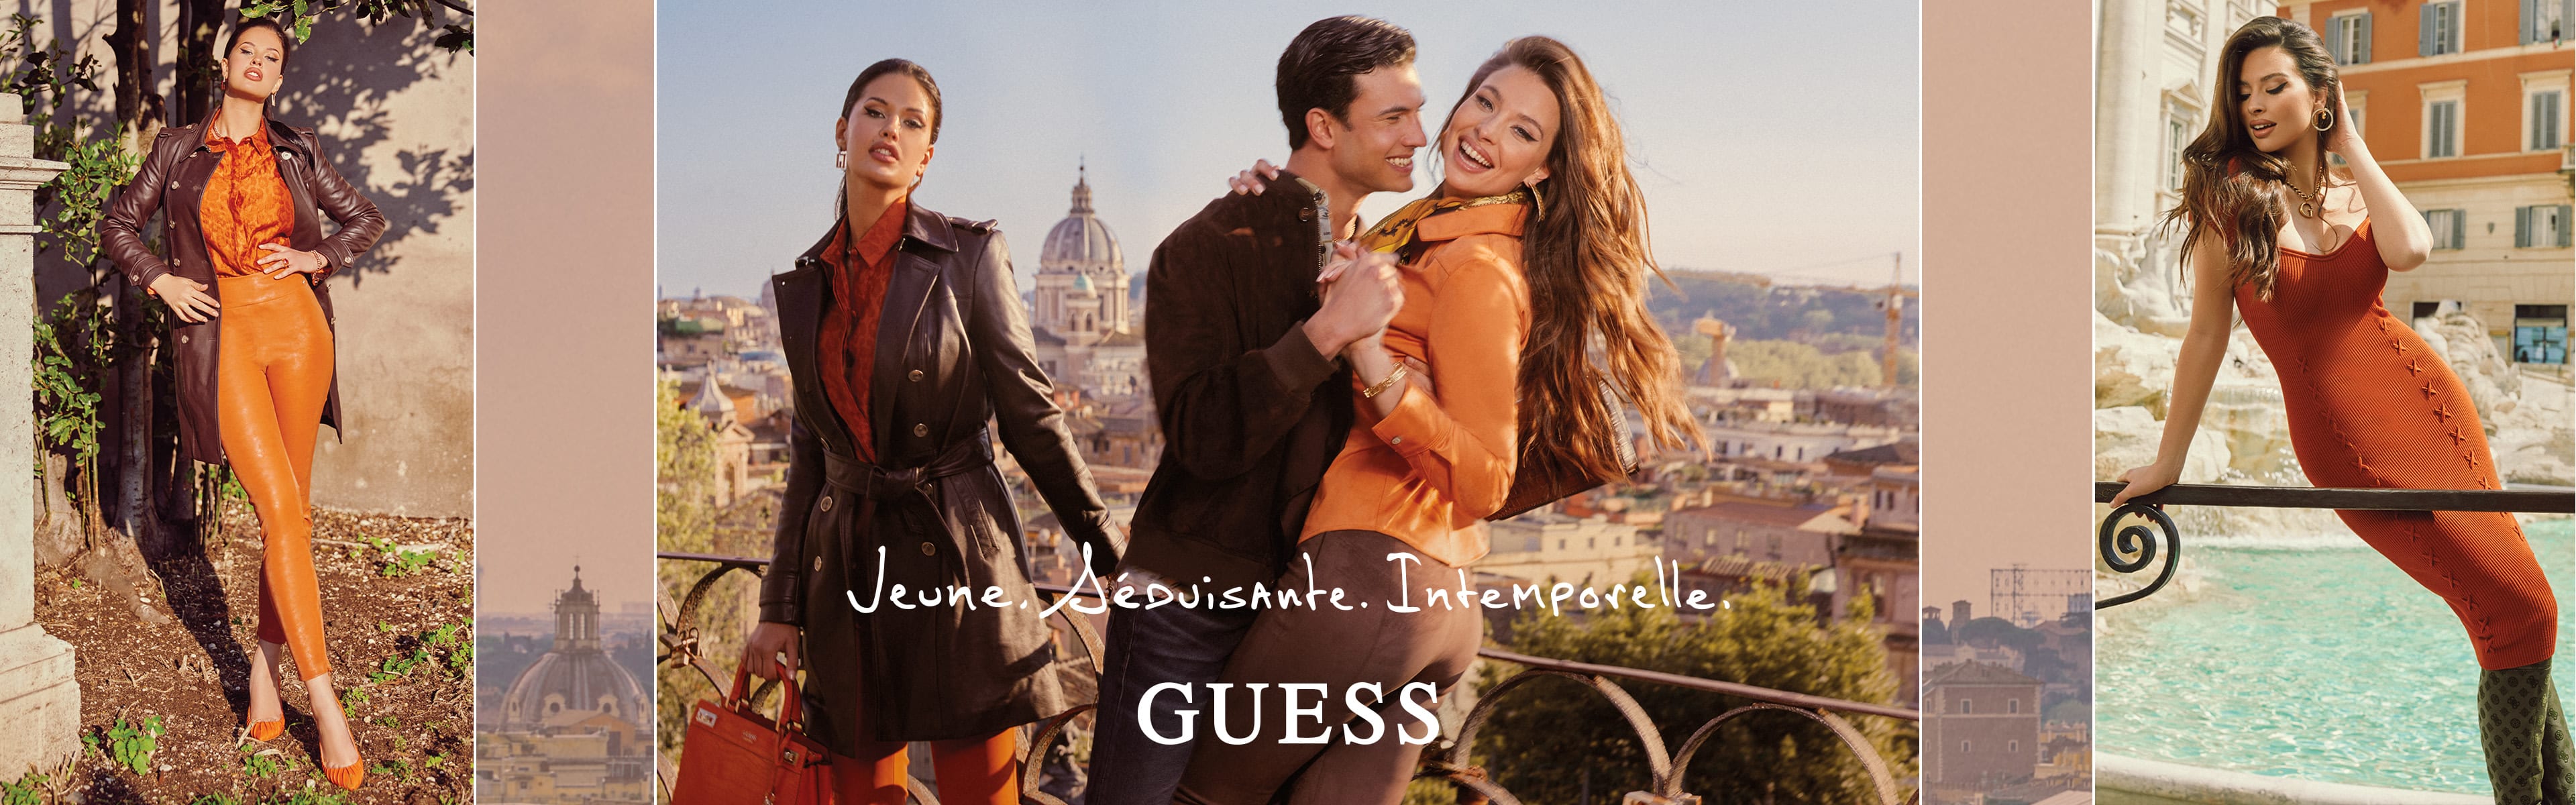 GUESS Fall Campaign lookbook 1